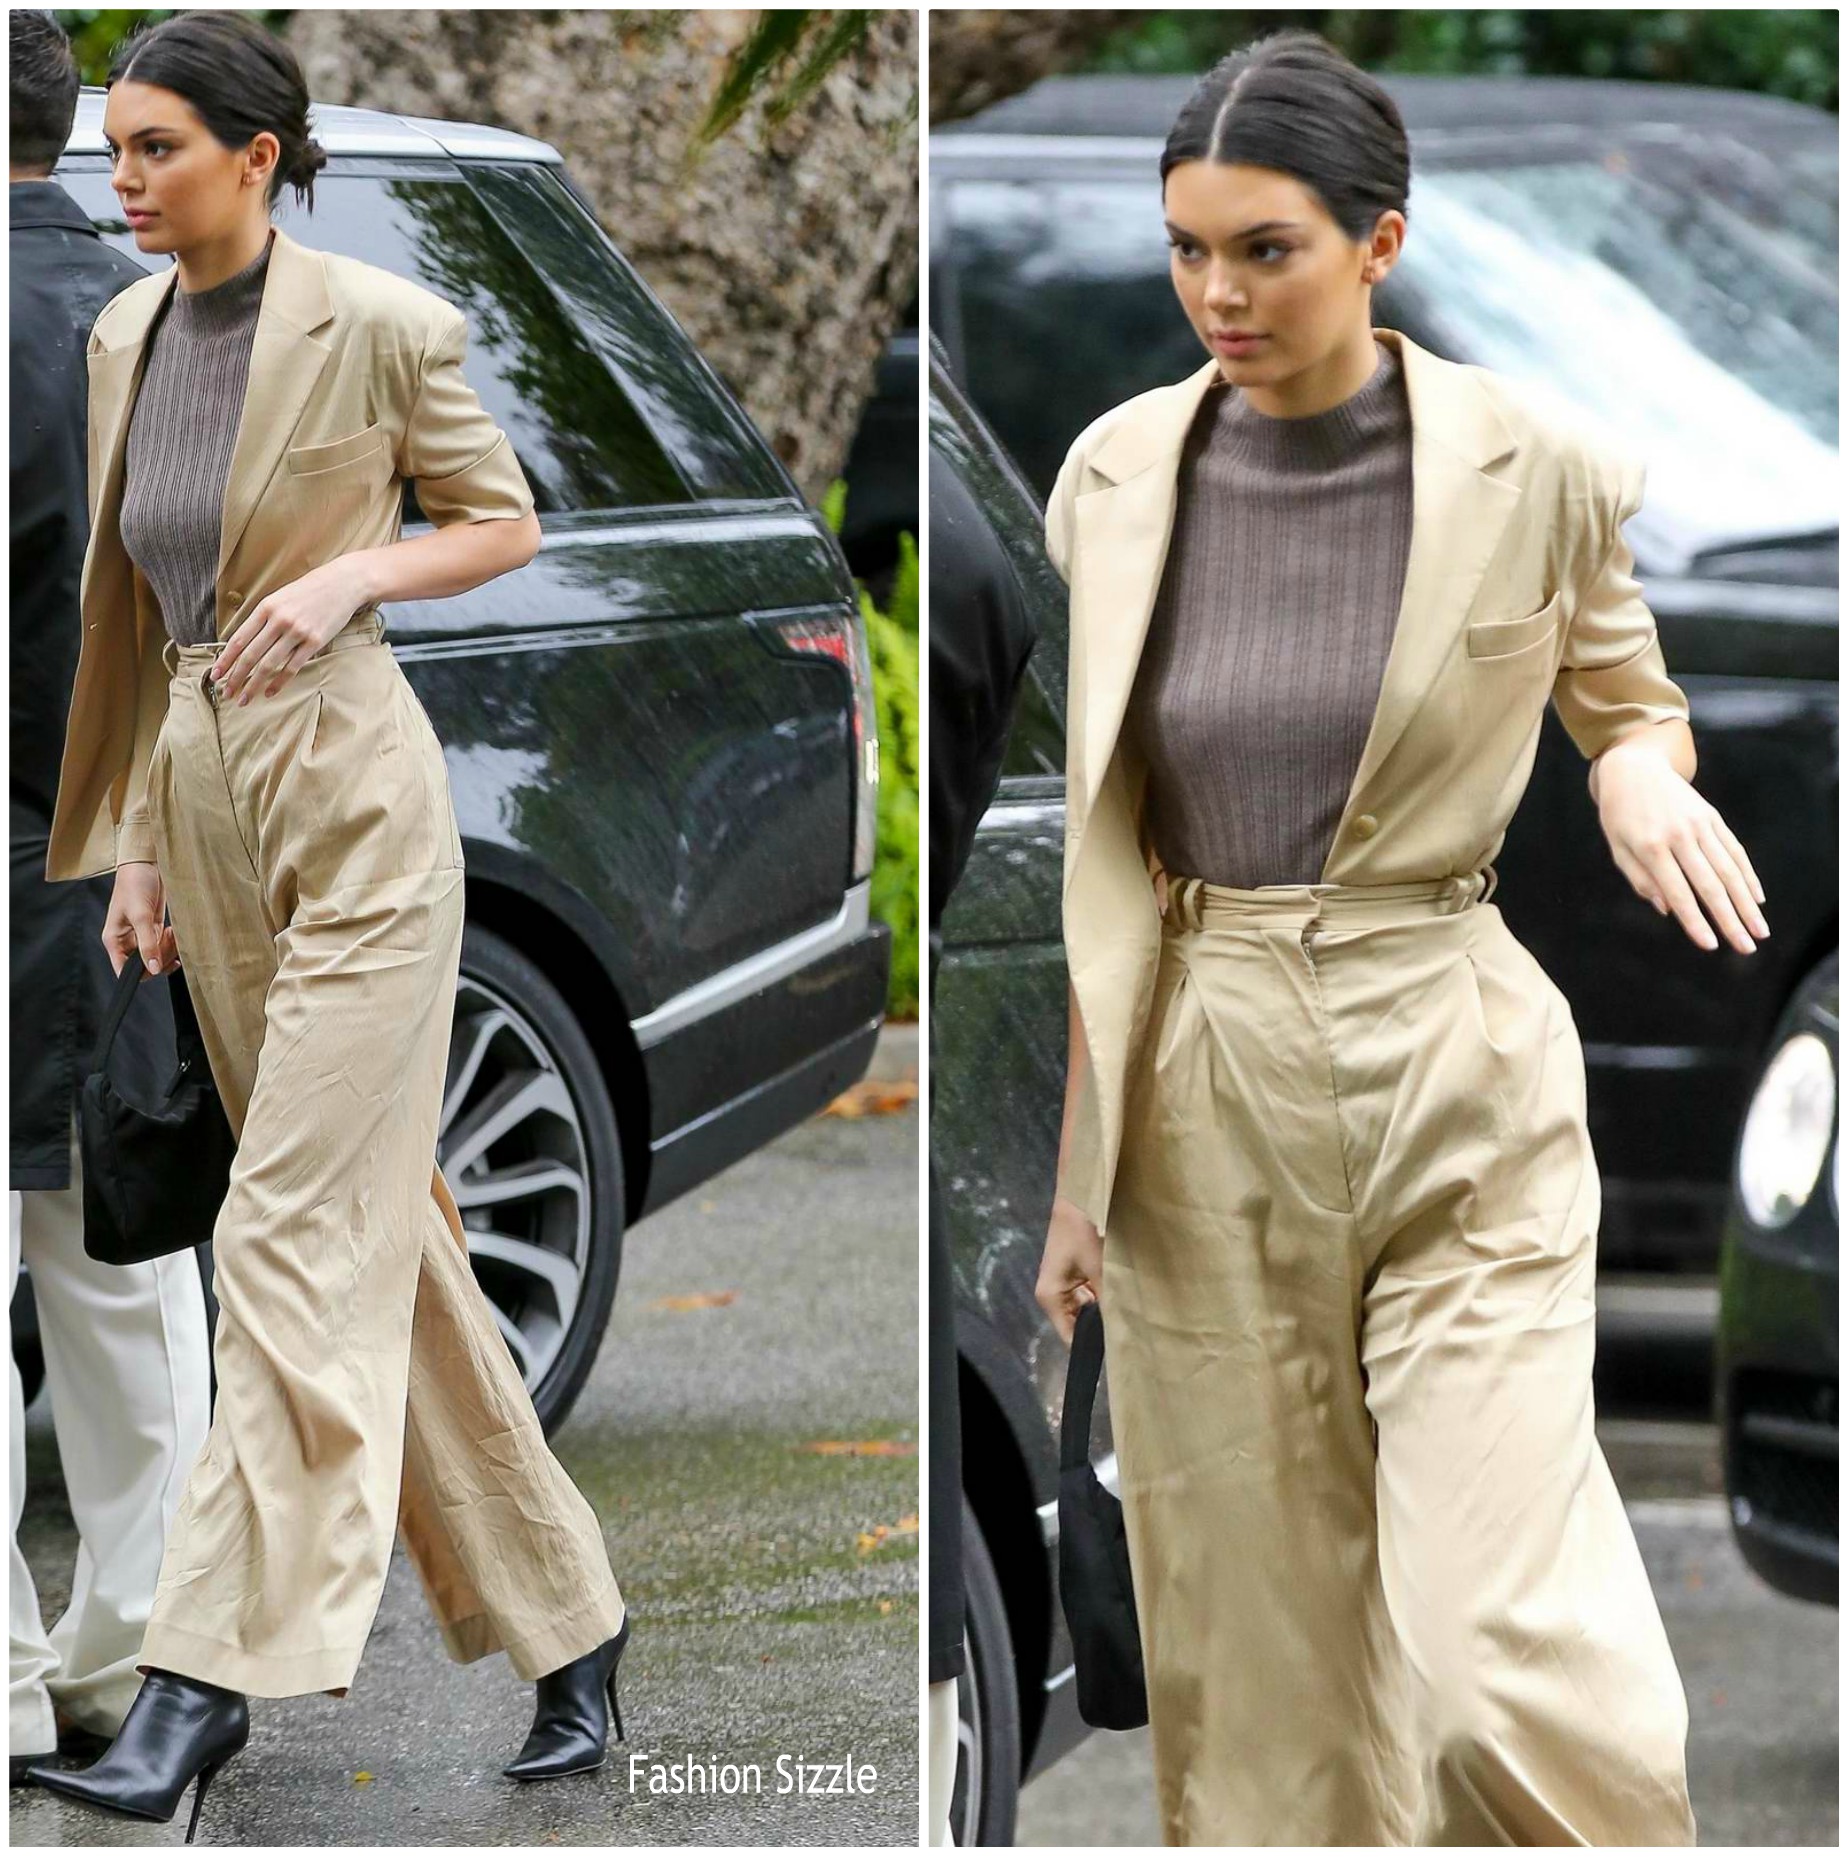 kendall-jenner-in-moon-choi-arrives-at-khloe-kardashians-baby-shower-in-bel-air